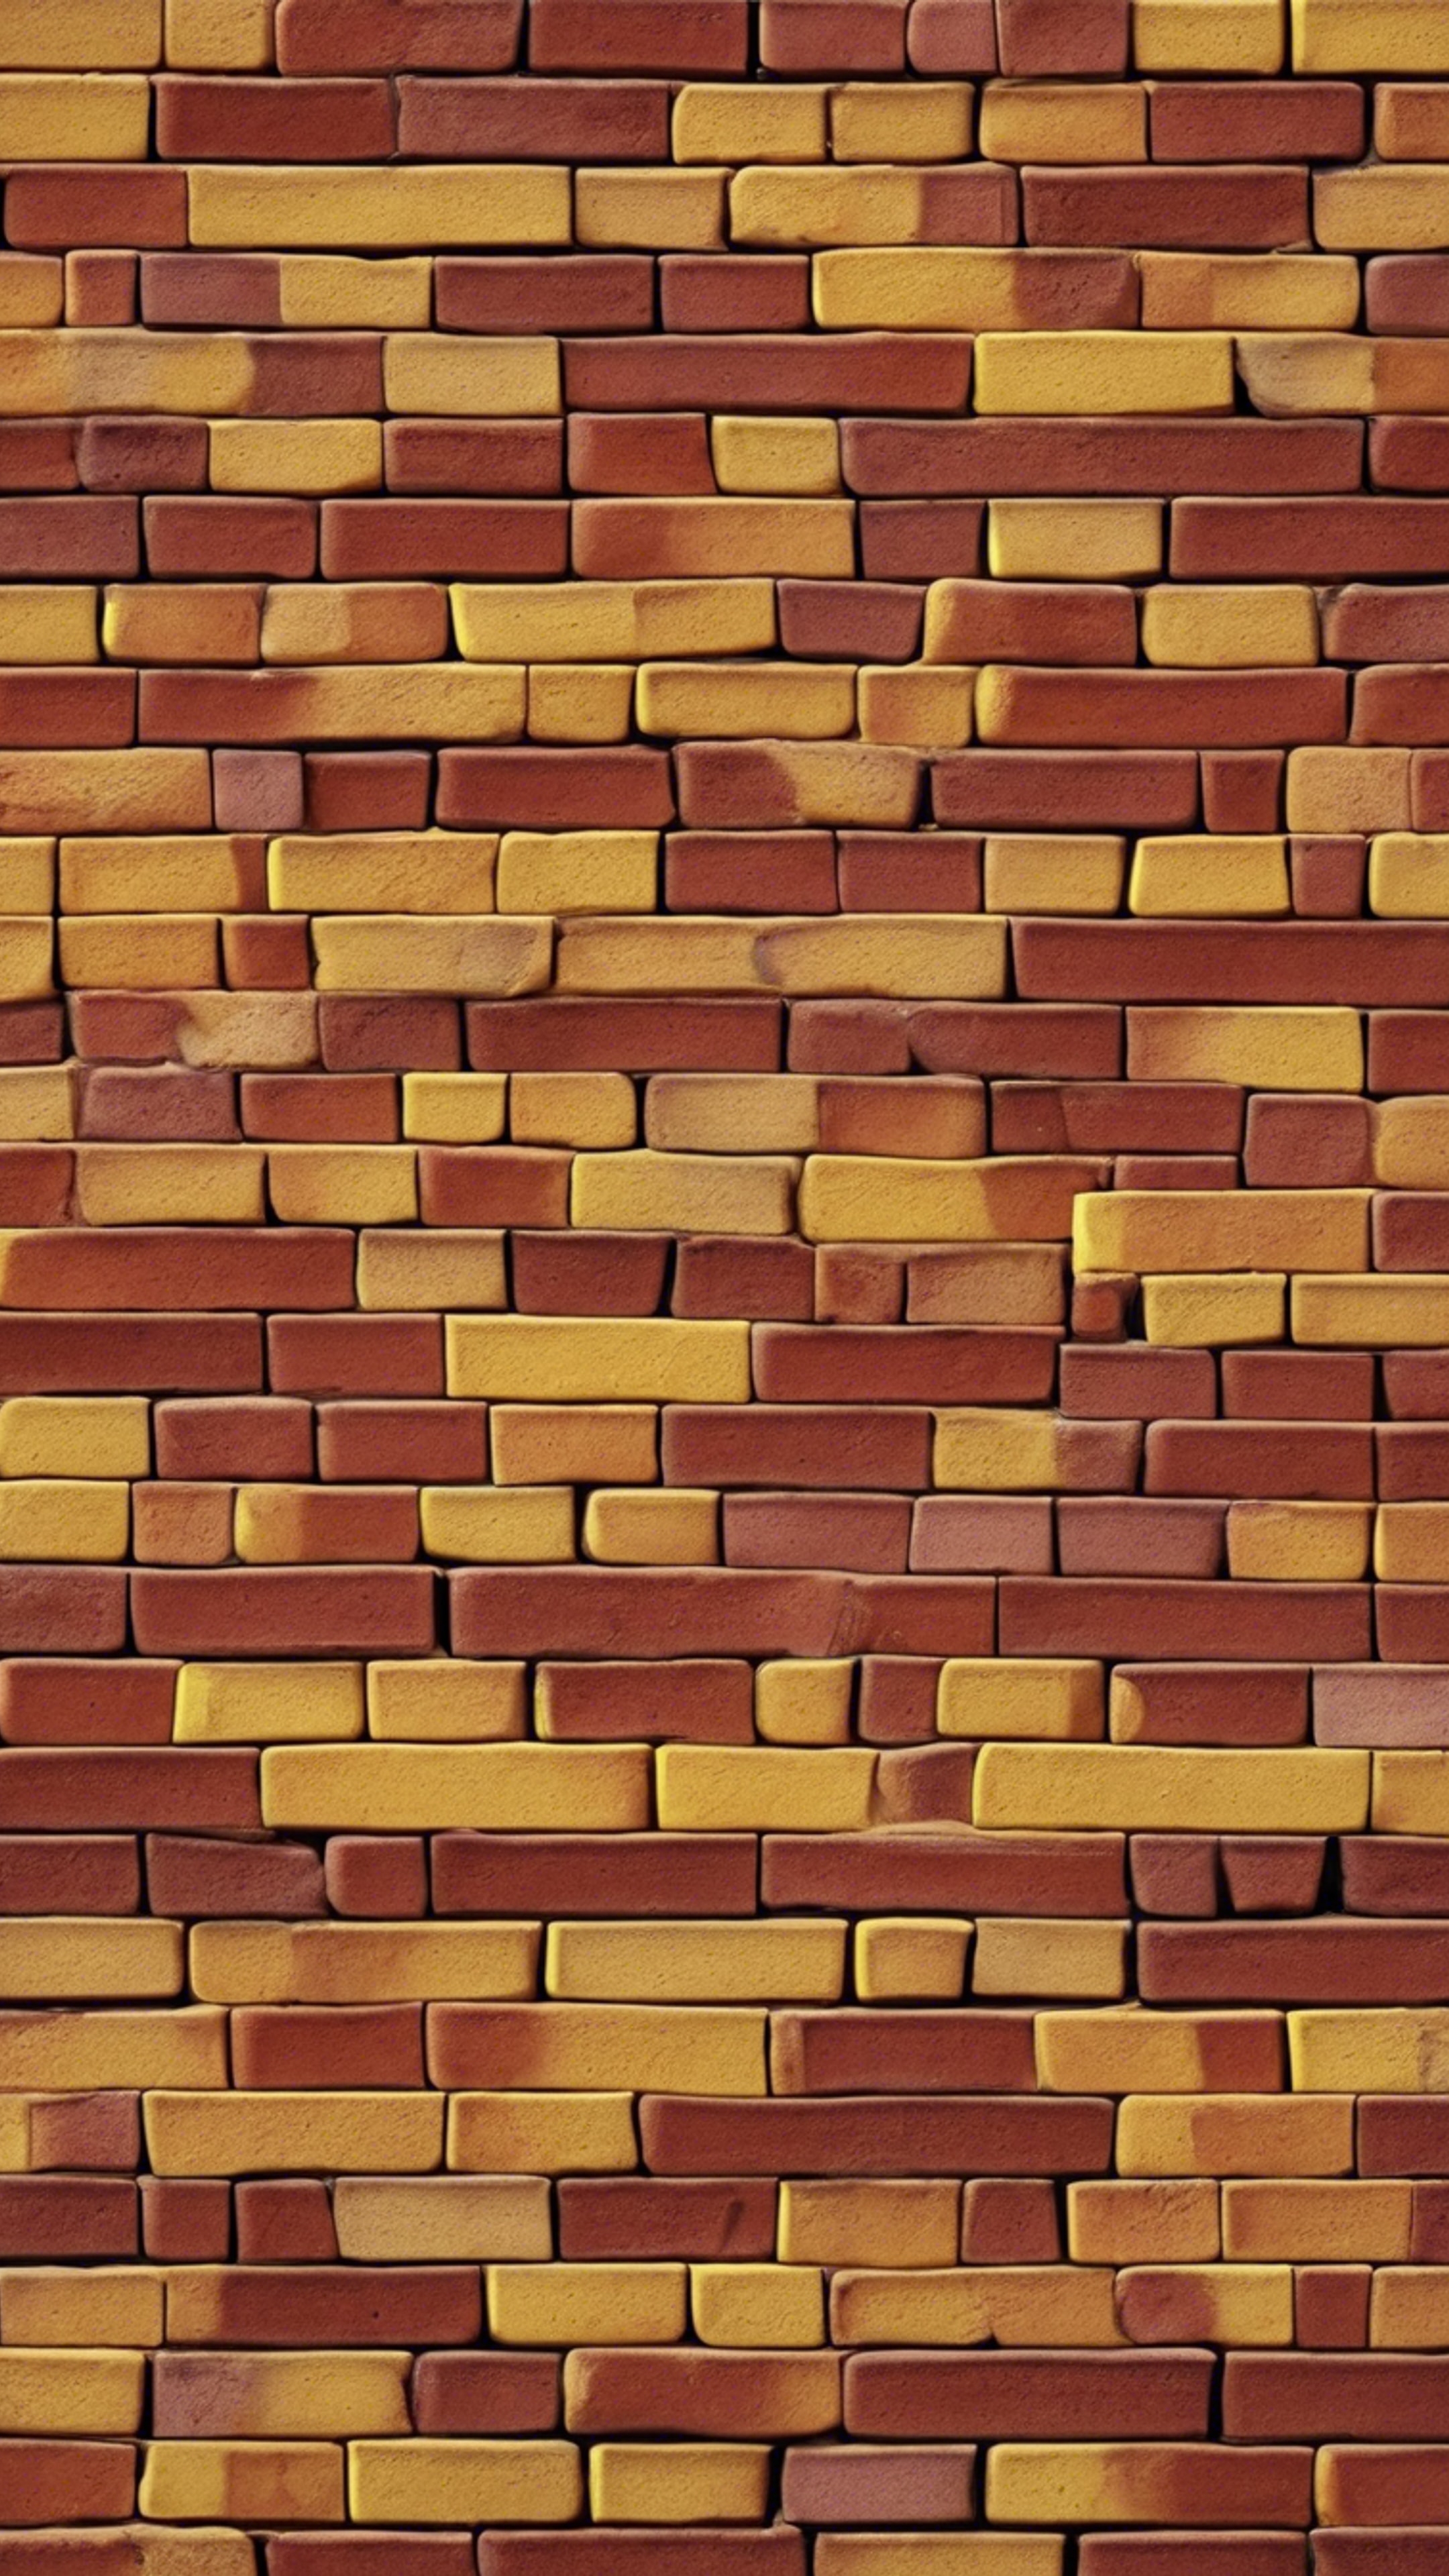 A tight close-up of a seamless, repeating pattern of red and yellow bricks. ورق الجدران[1ac961dc3db44015ab94]